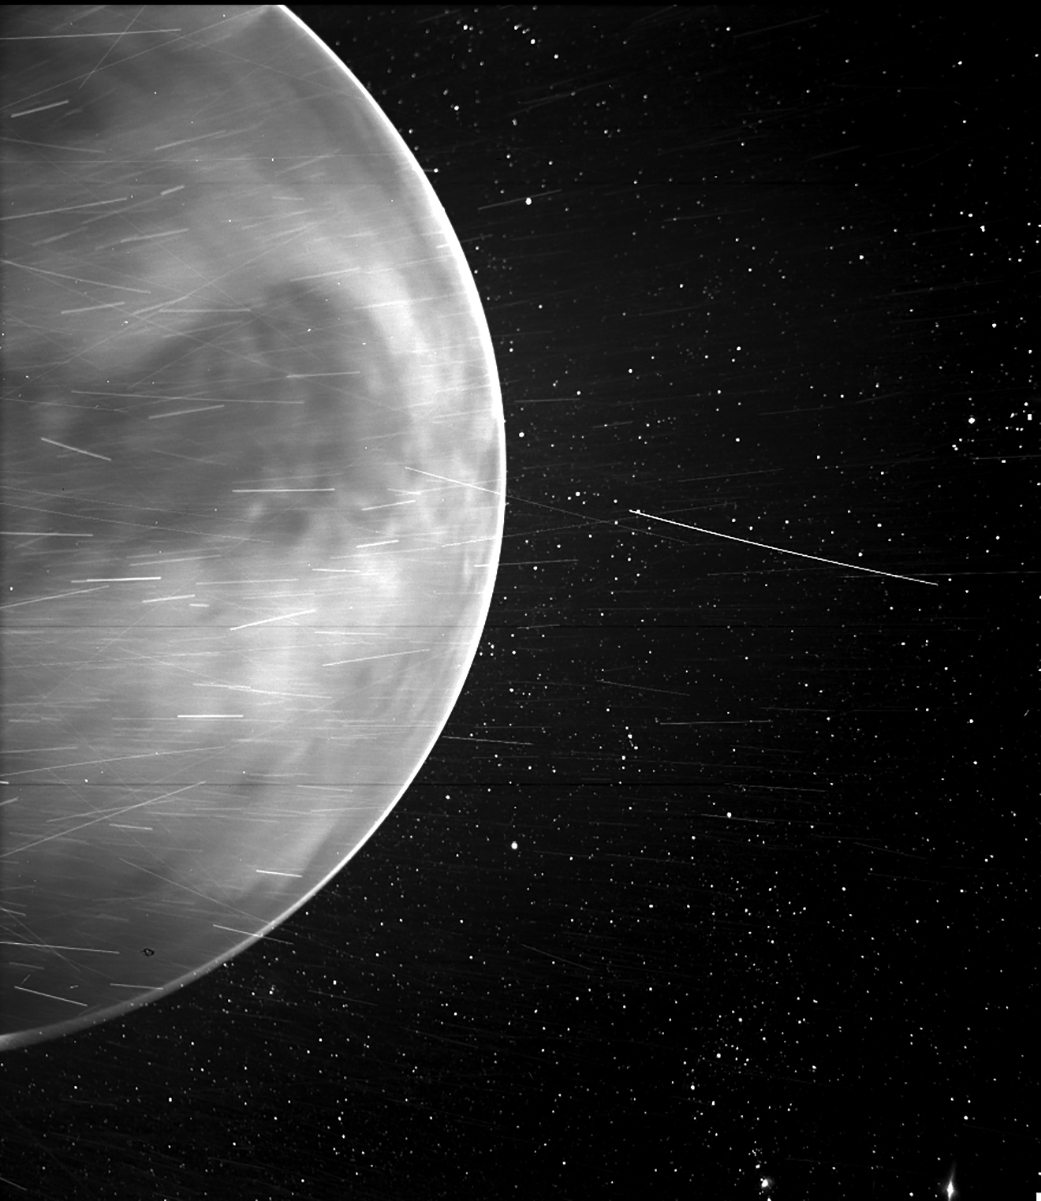 A black and white image showing one hemisphere of planet Venus against a backdrop of stars, with bright streaks throughout.